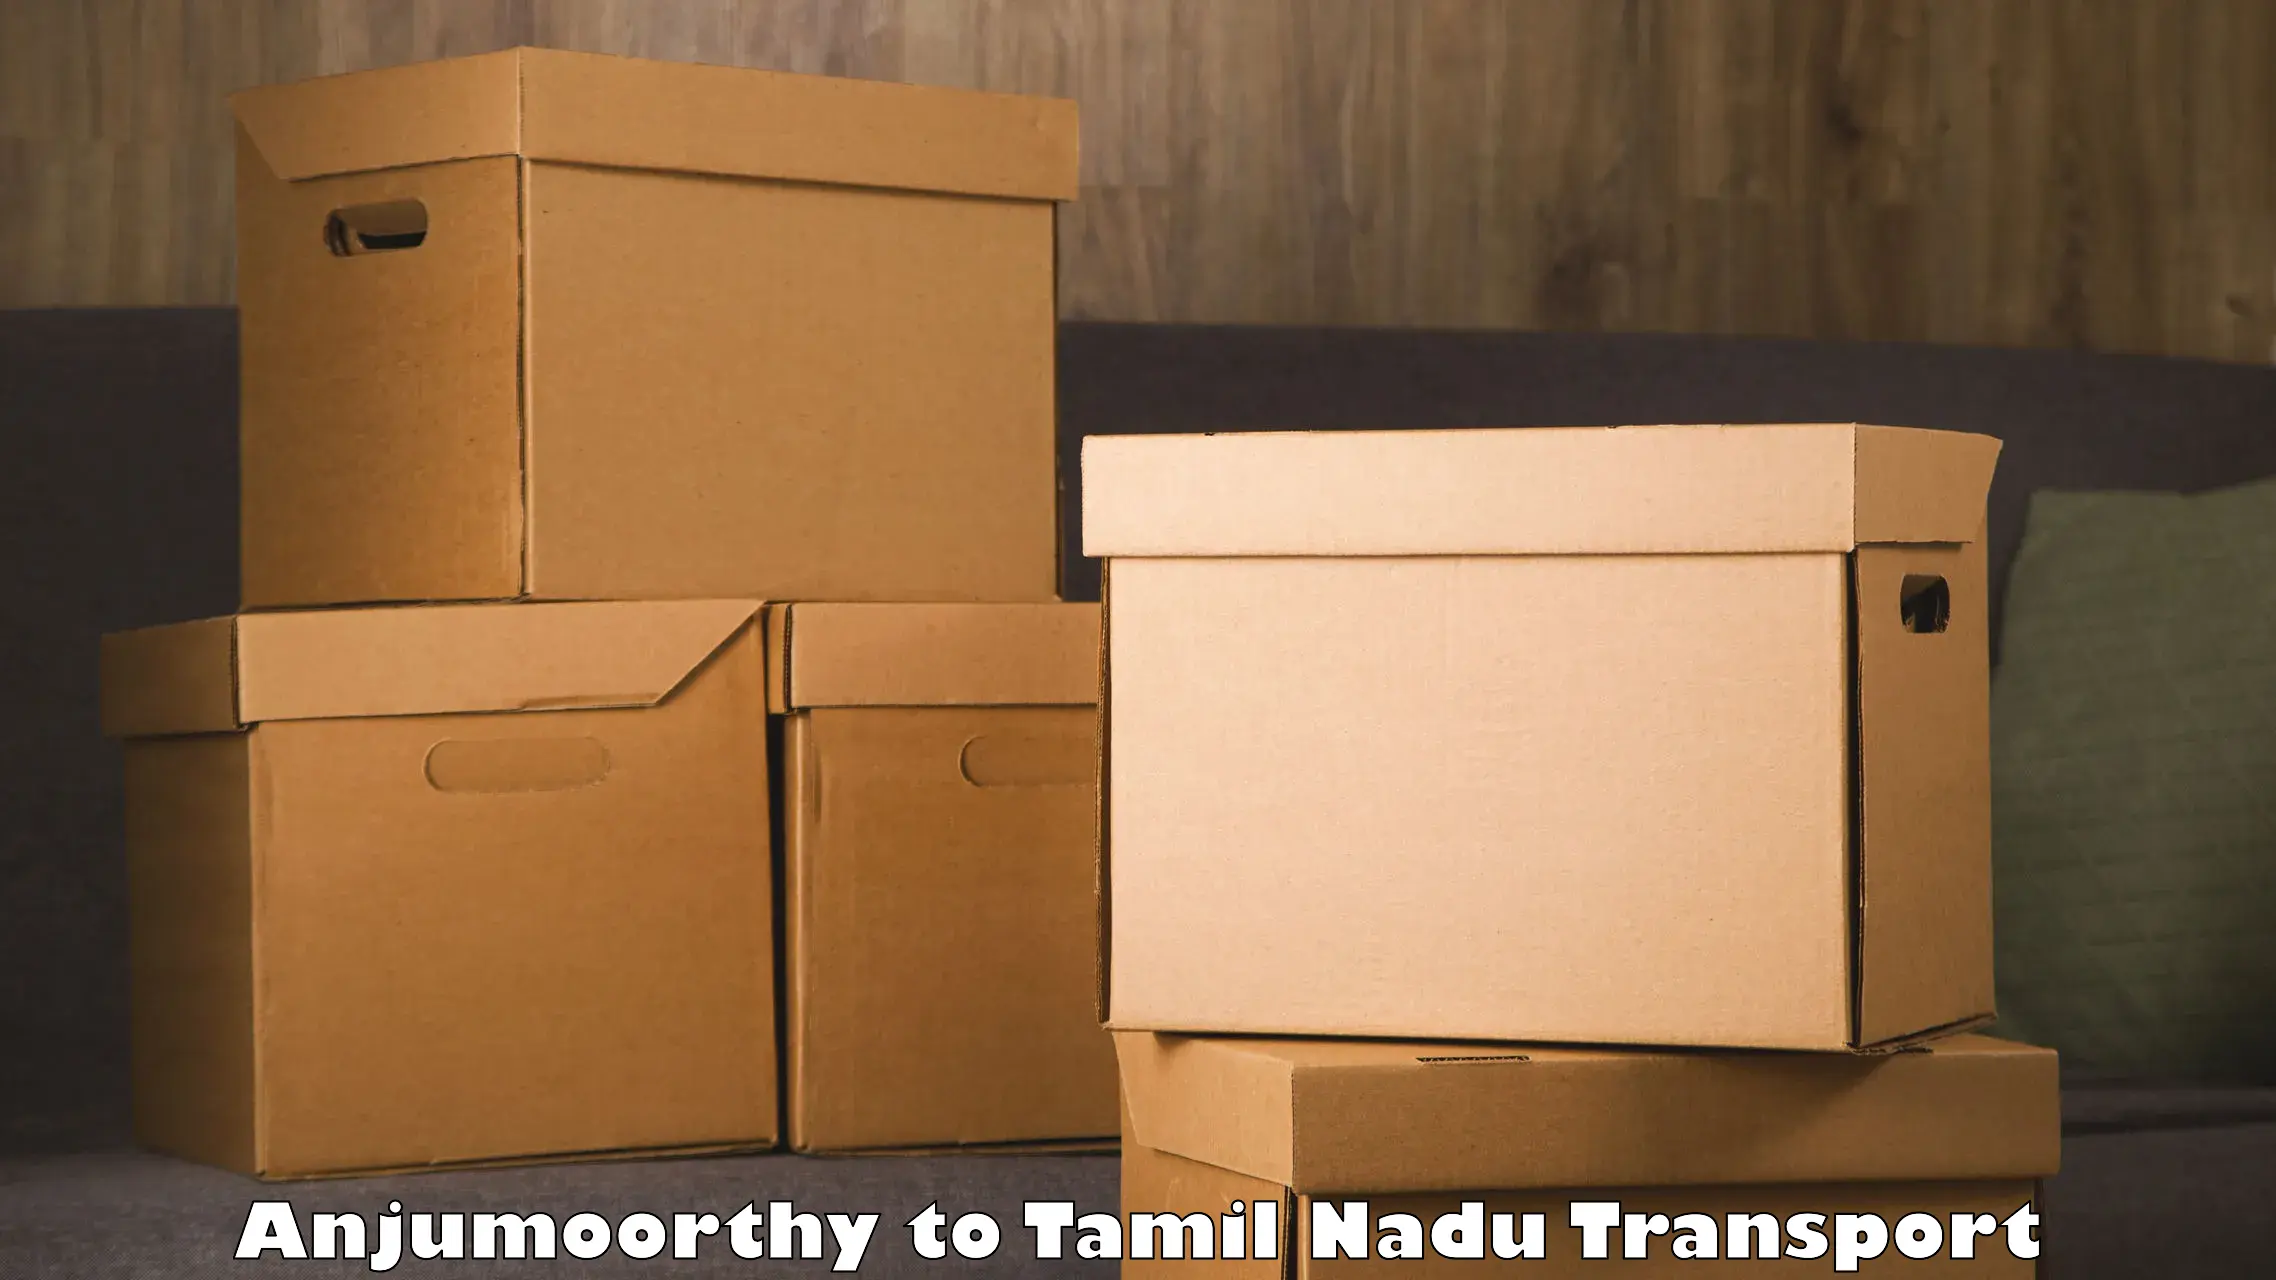 Shipping services Anjumoorthy to The Gandhigram Rural Institute